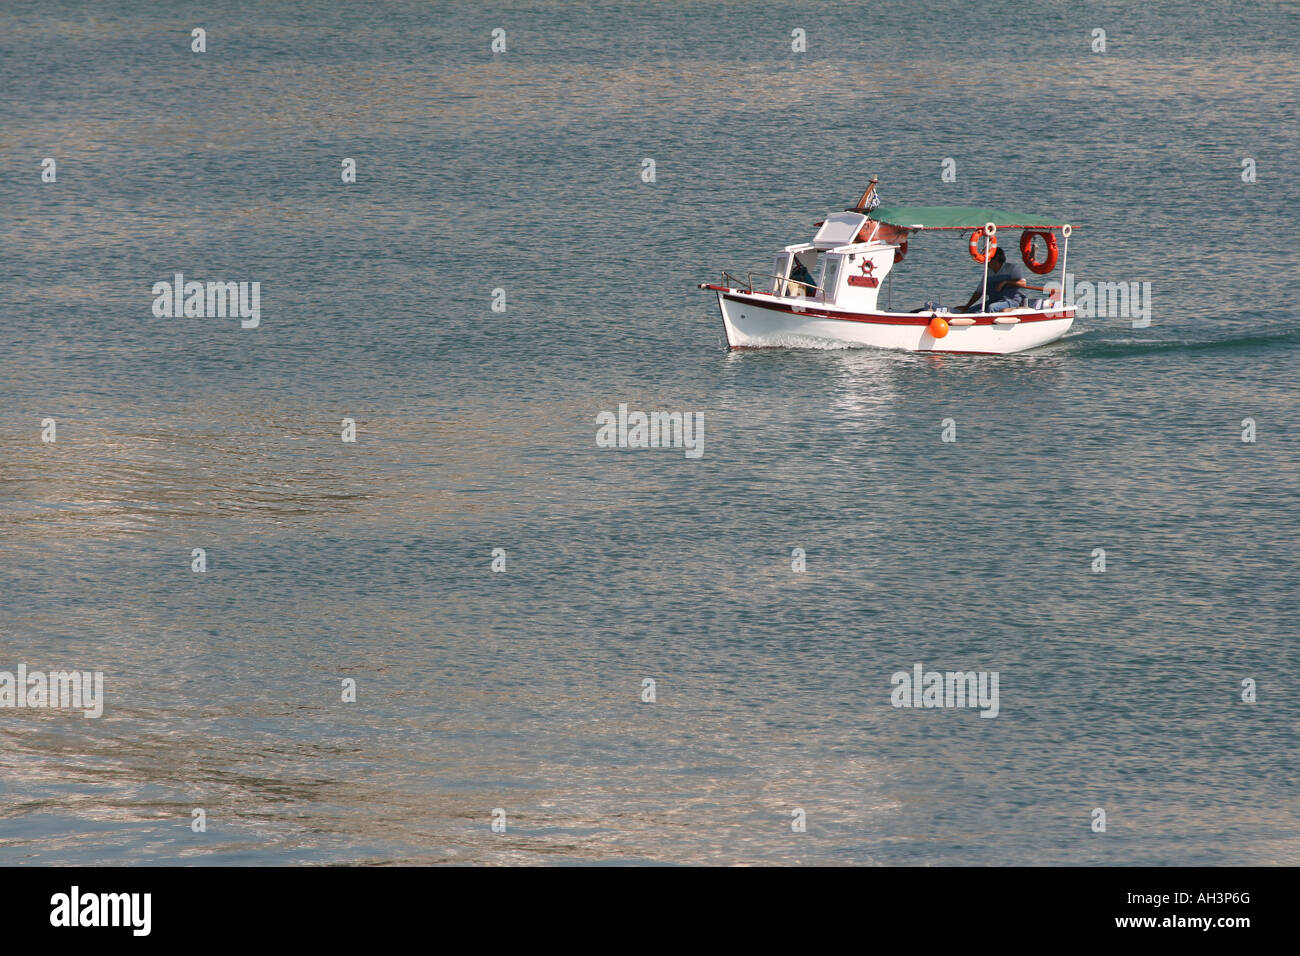 traditional wooden small boat sailing in the sea Stock Photo